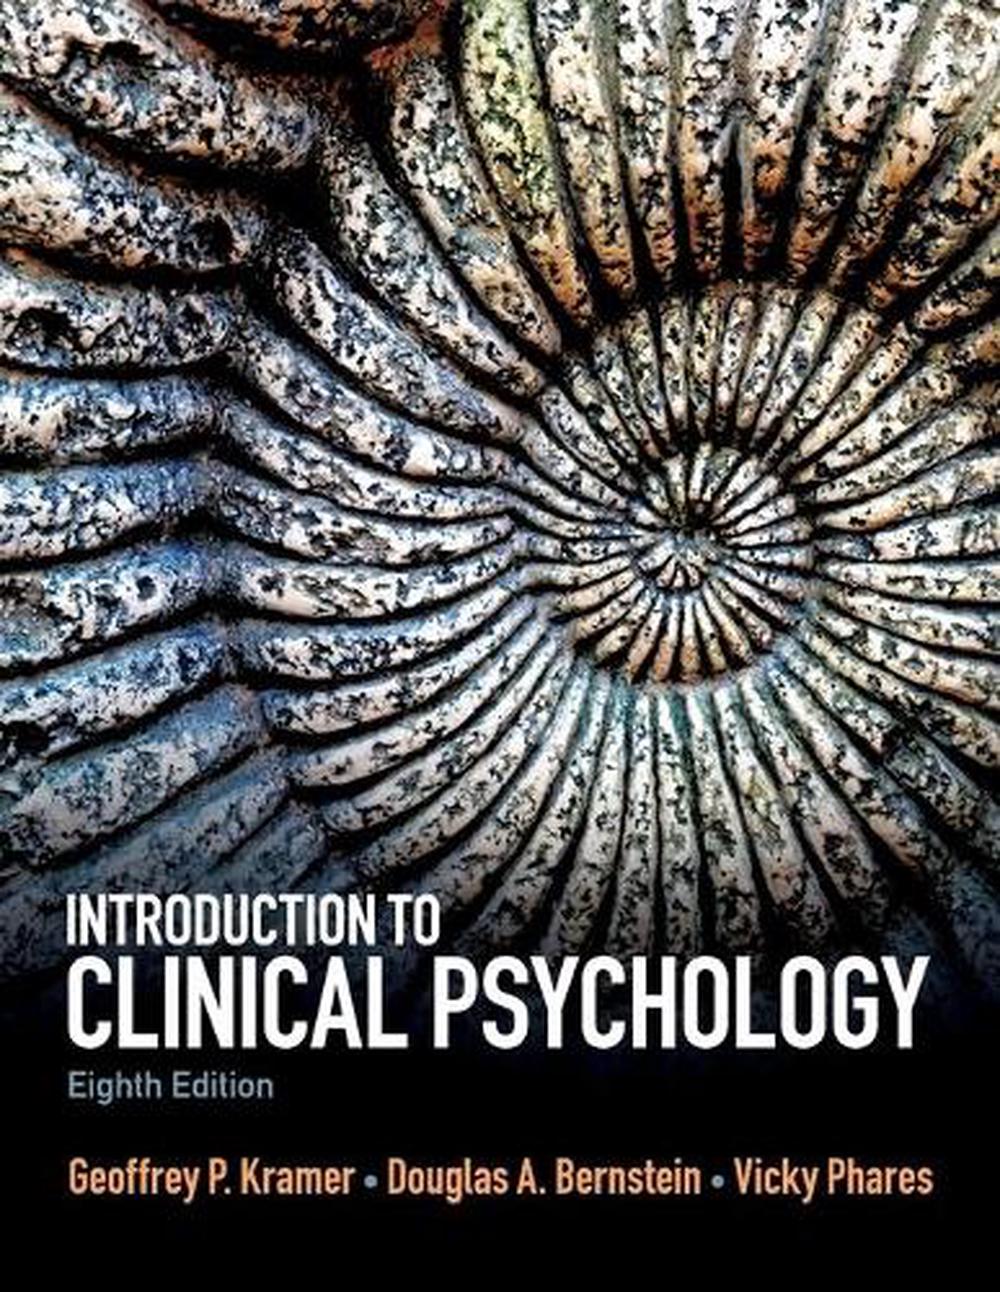 clinical psychology thesis